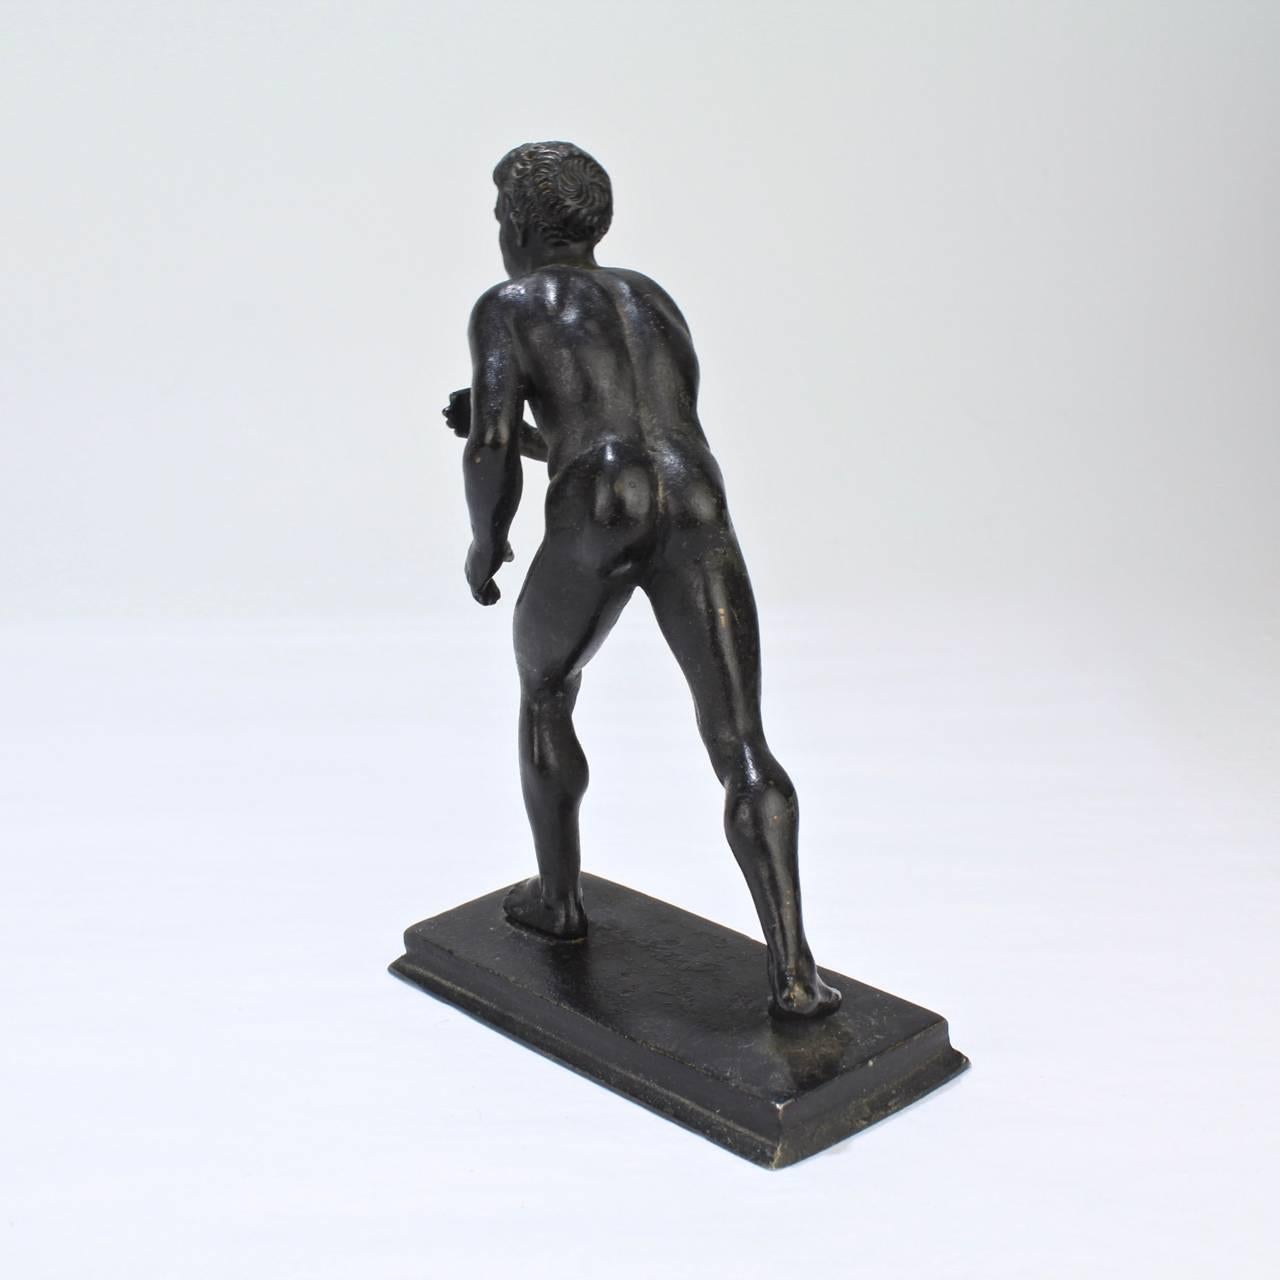 A good cabinet-sized Grand Tour bronze sculpture of the Herculaneum runner.

Cast after the Roman model in the Vila of the Papyri (Herculaneum). 

With a rich, near-black patina to the surface.

Provenance: From the estate of George Lucas of